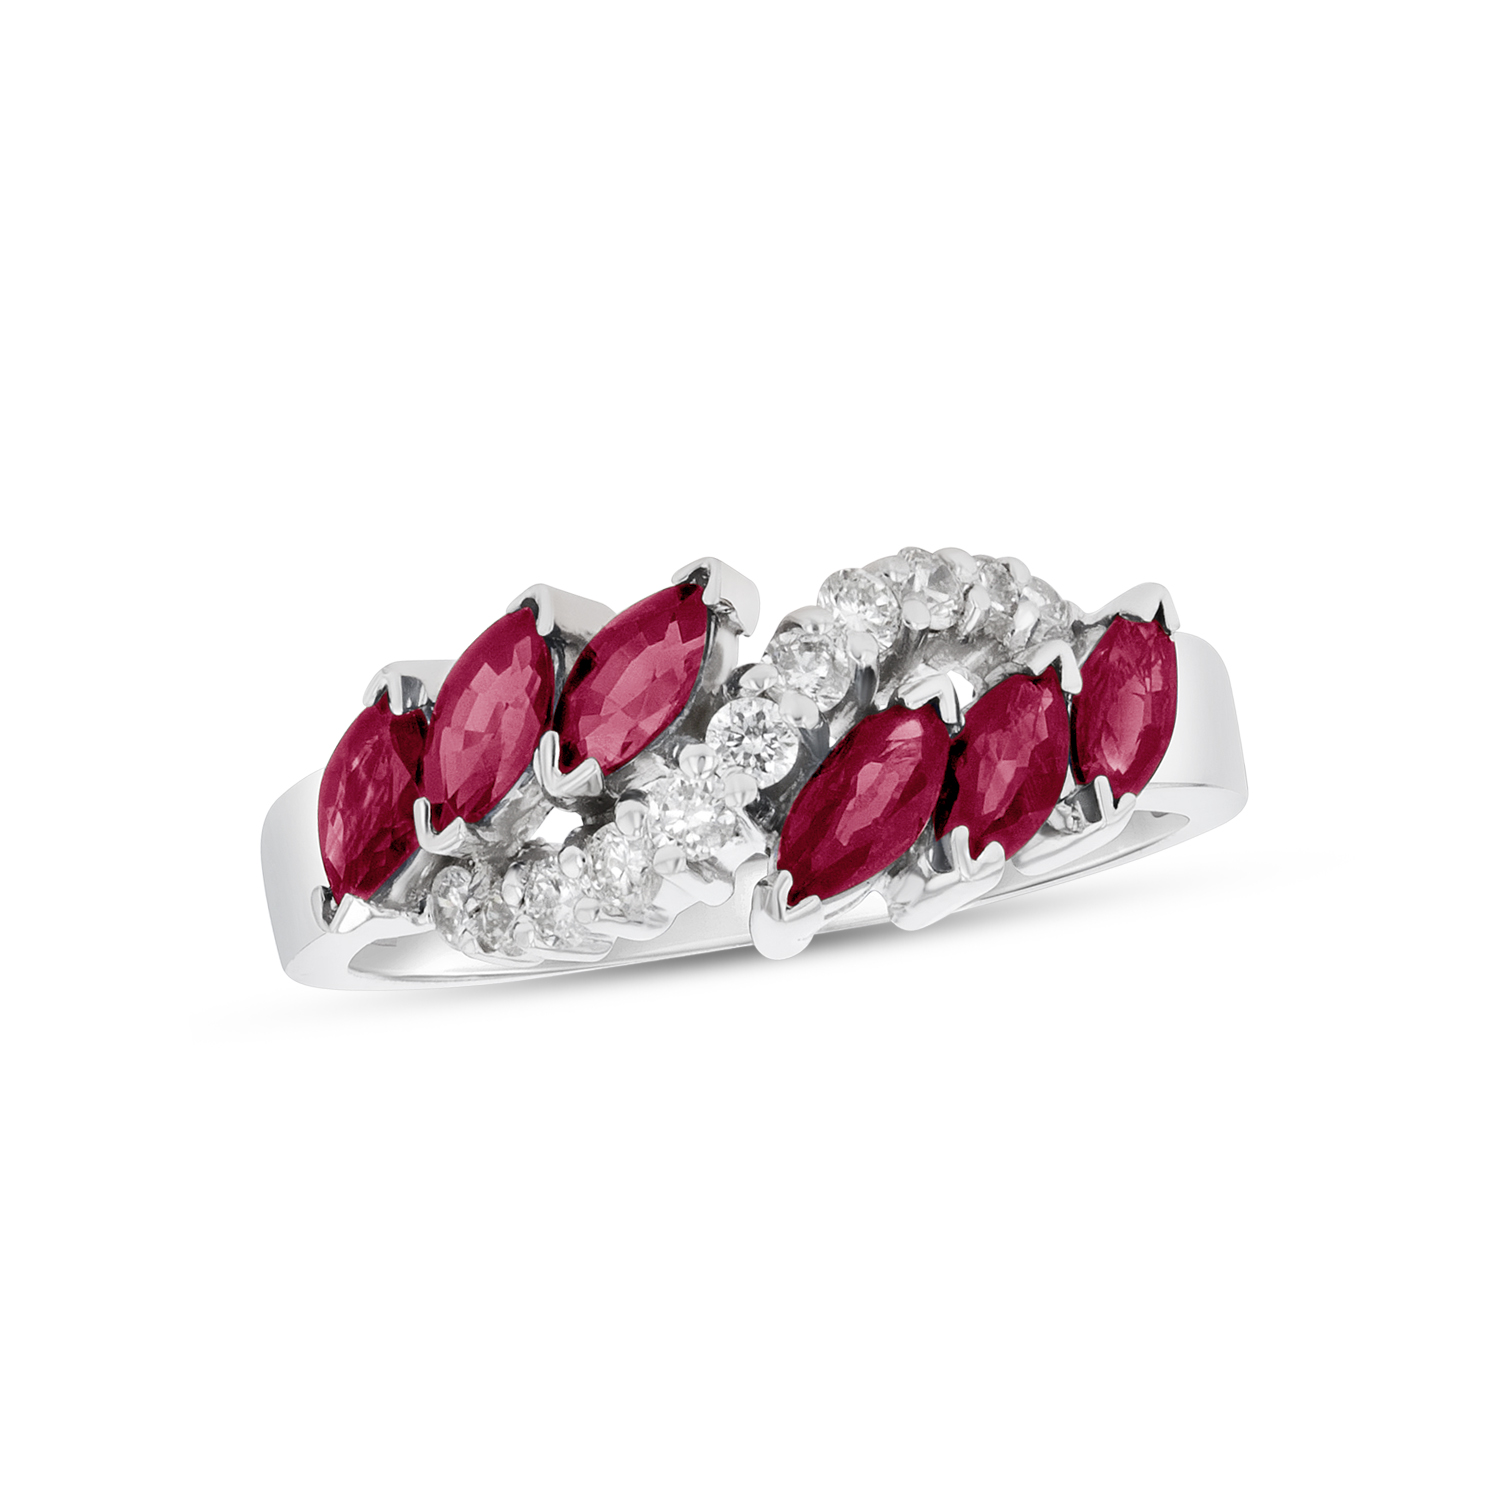 View 1.25ctw Diamond and MArquis Shaped Rubies in 14k White Gold